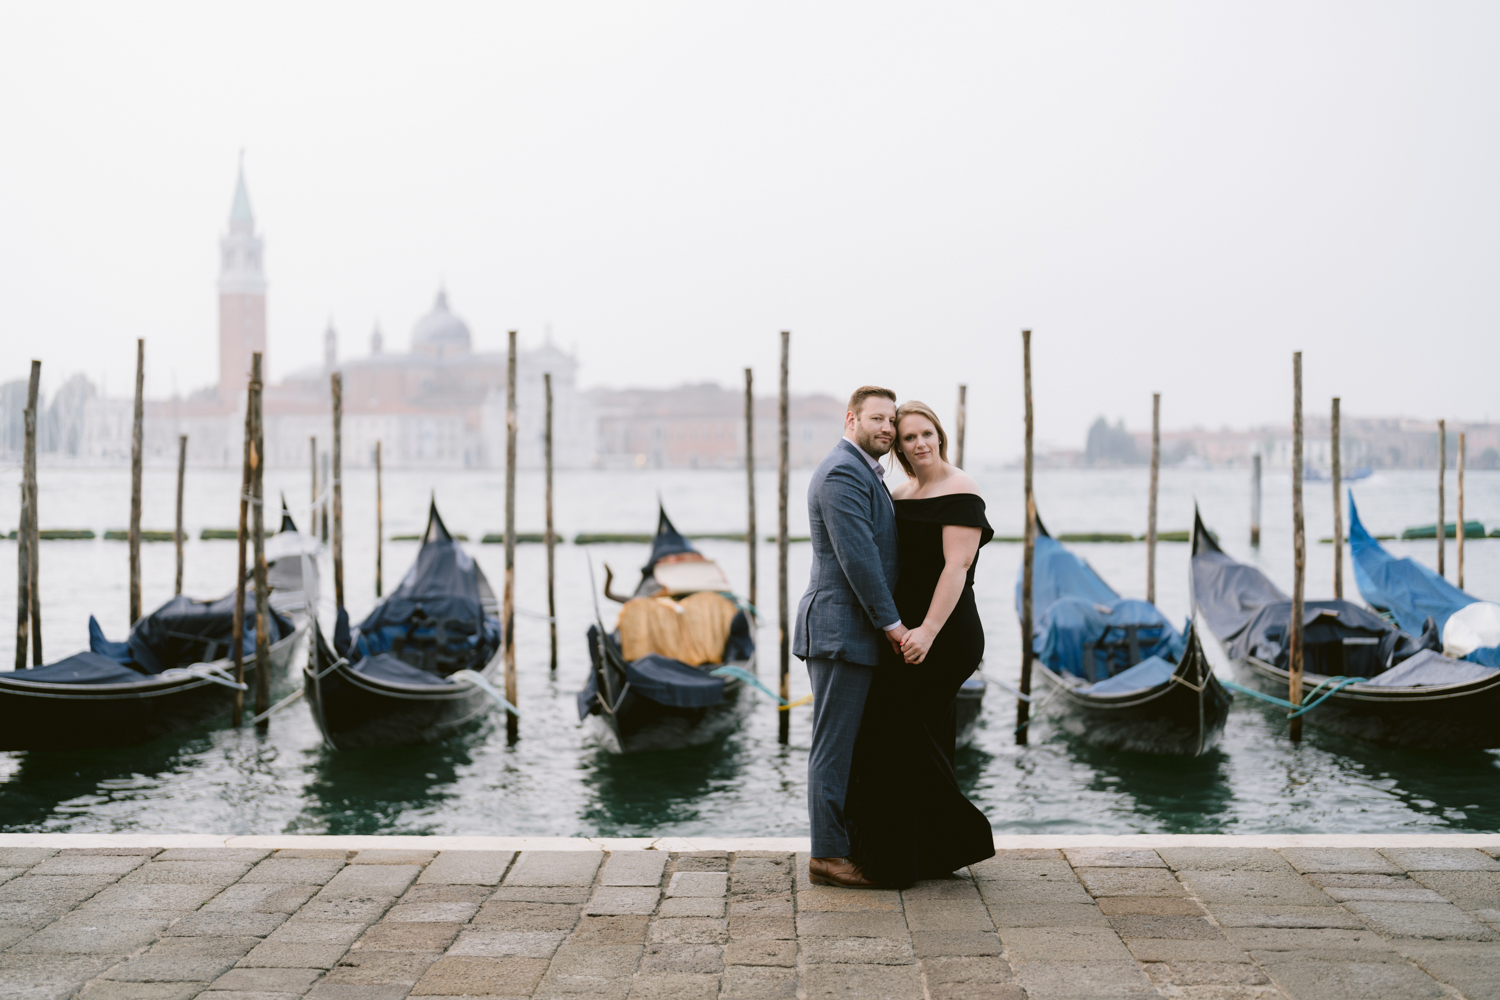 How to pose and where and when take professional romantic photos in Venice?